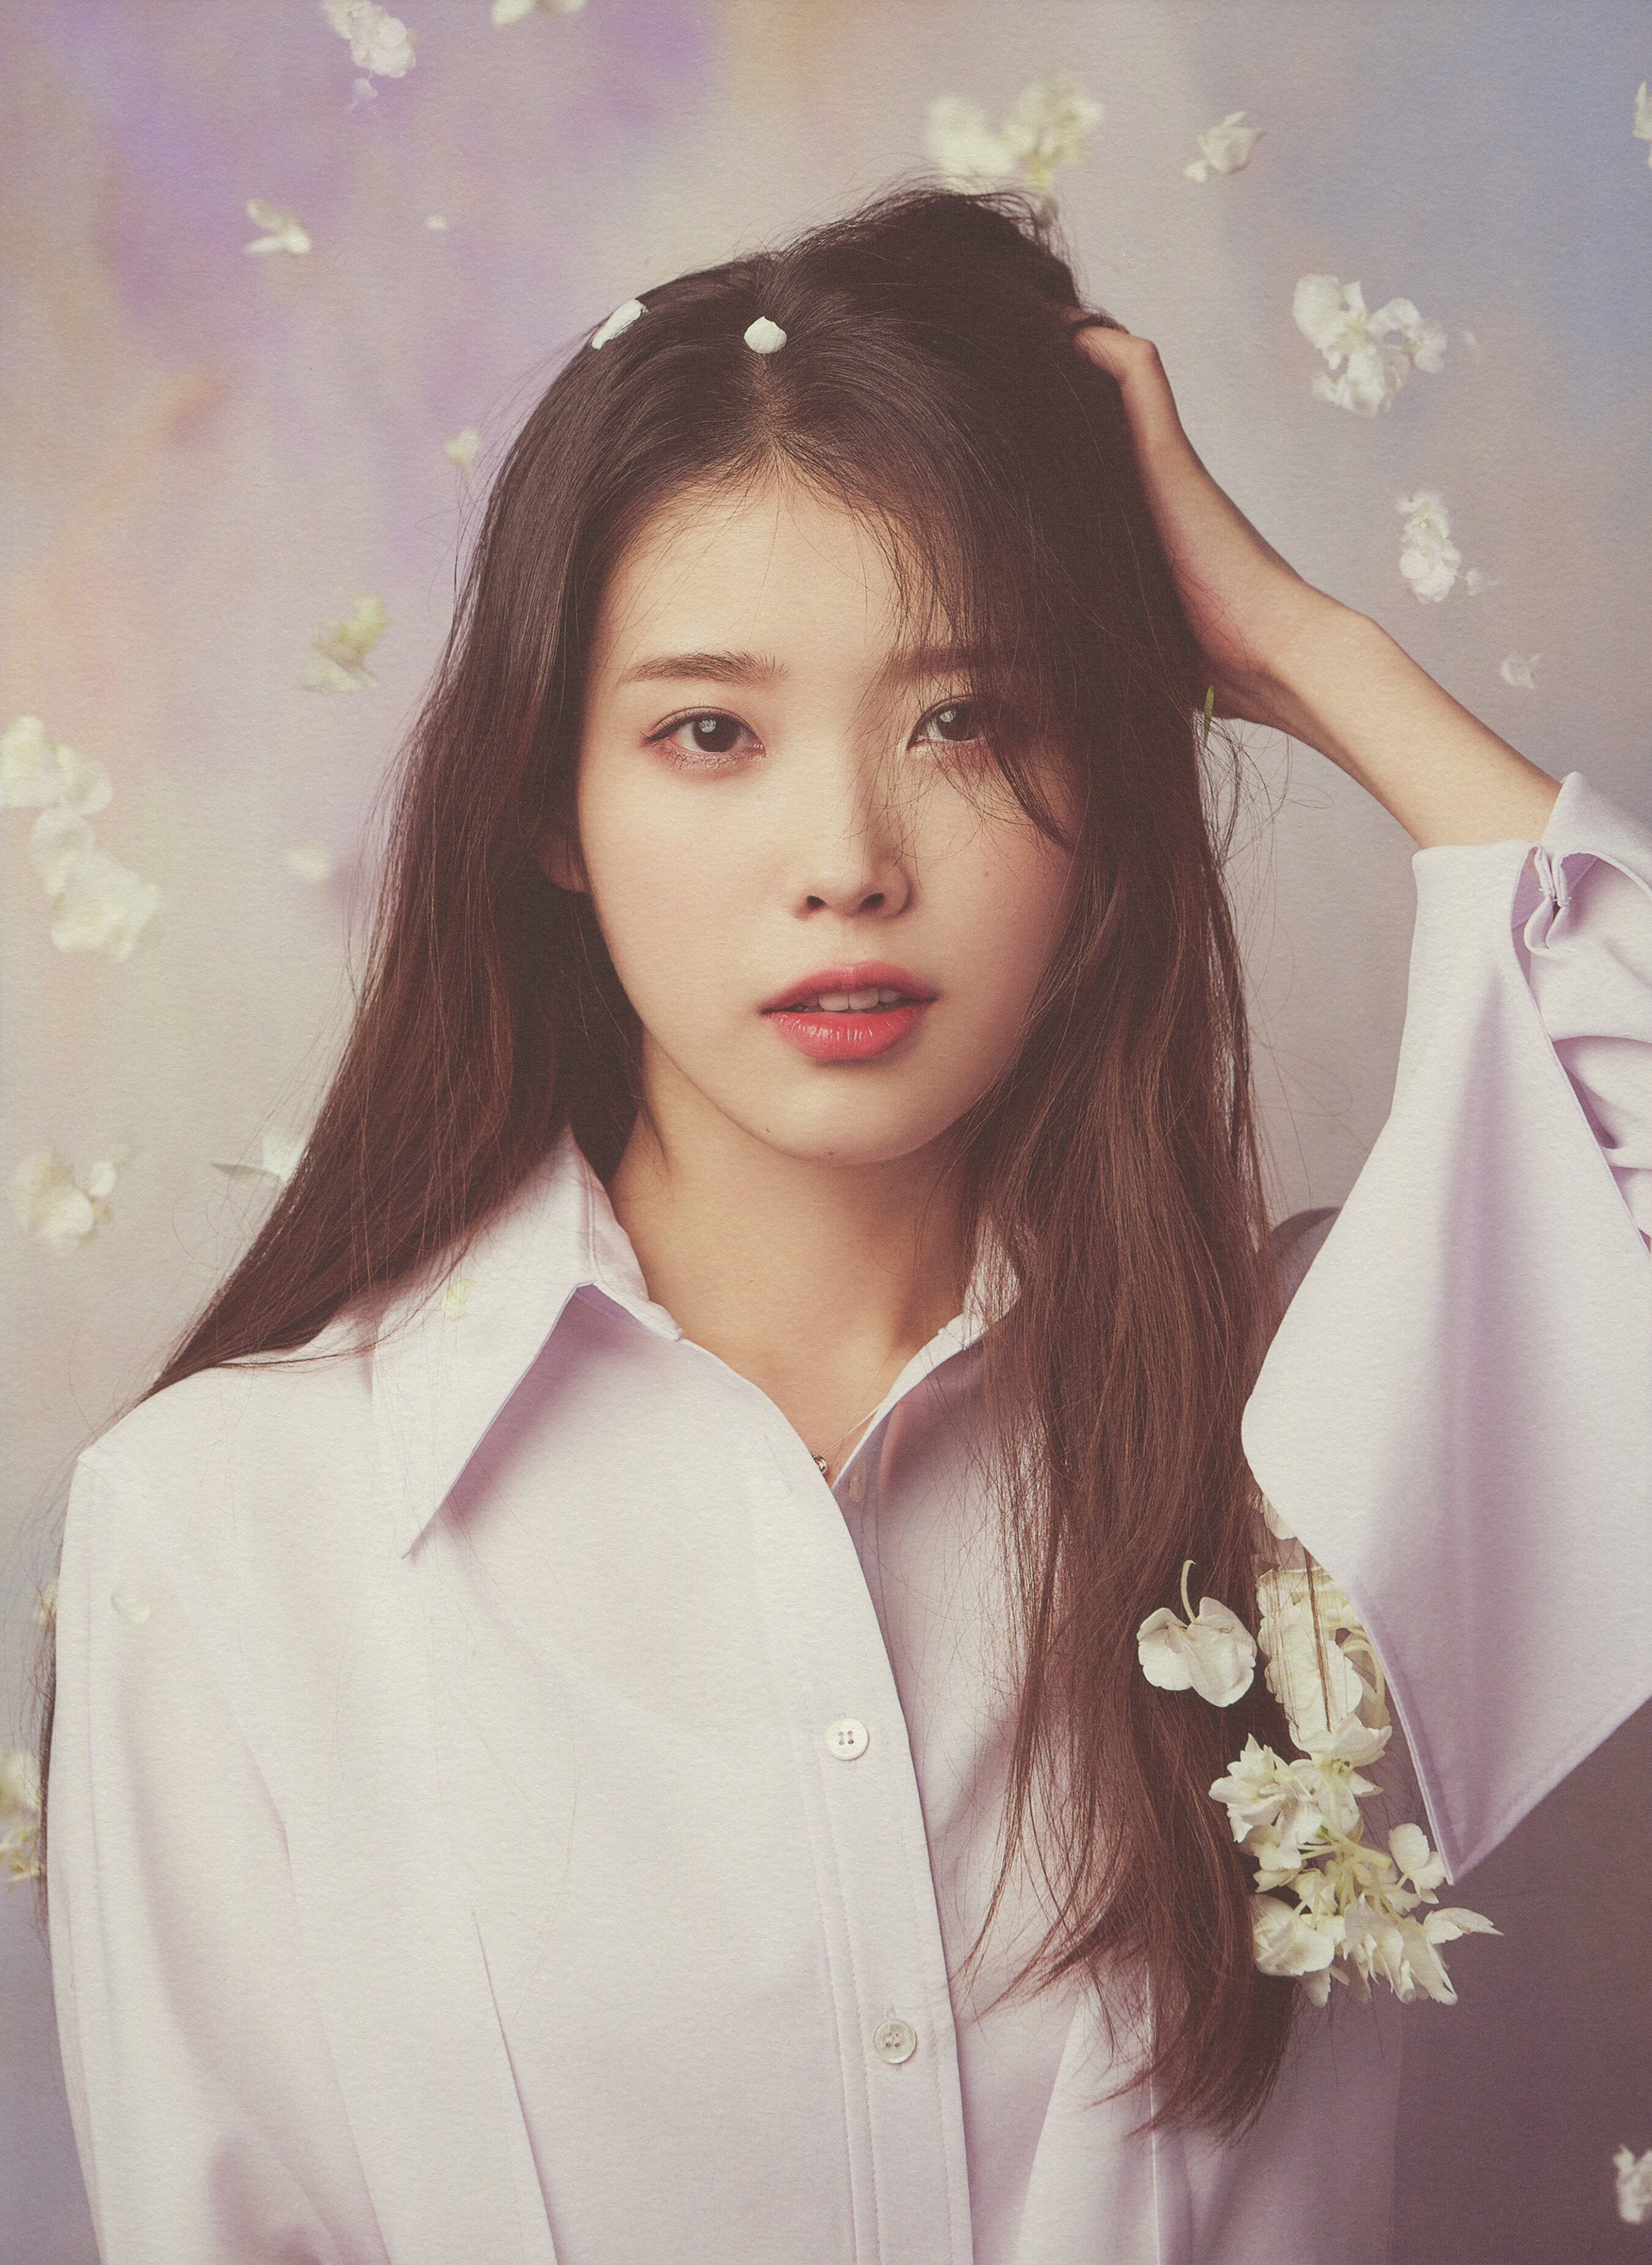 IU - 'LILAC' Photobook [SCANS] | Kpopping